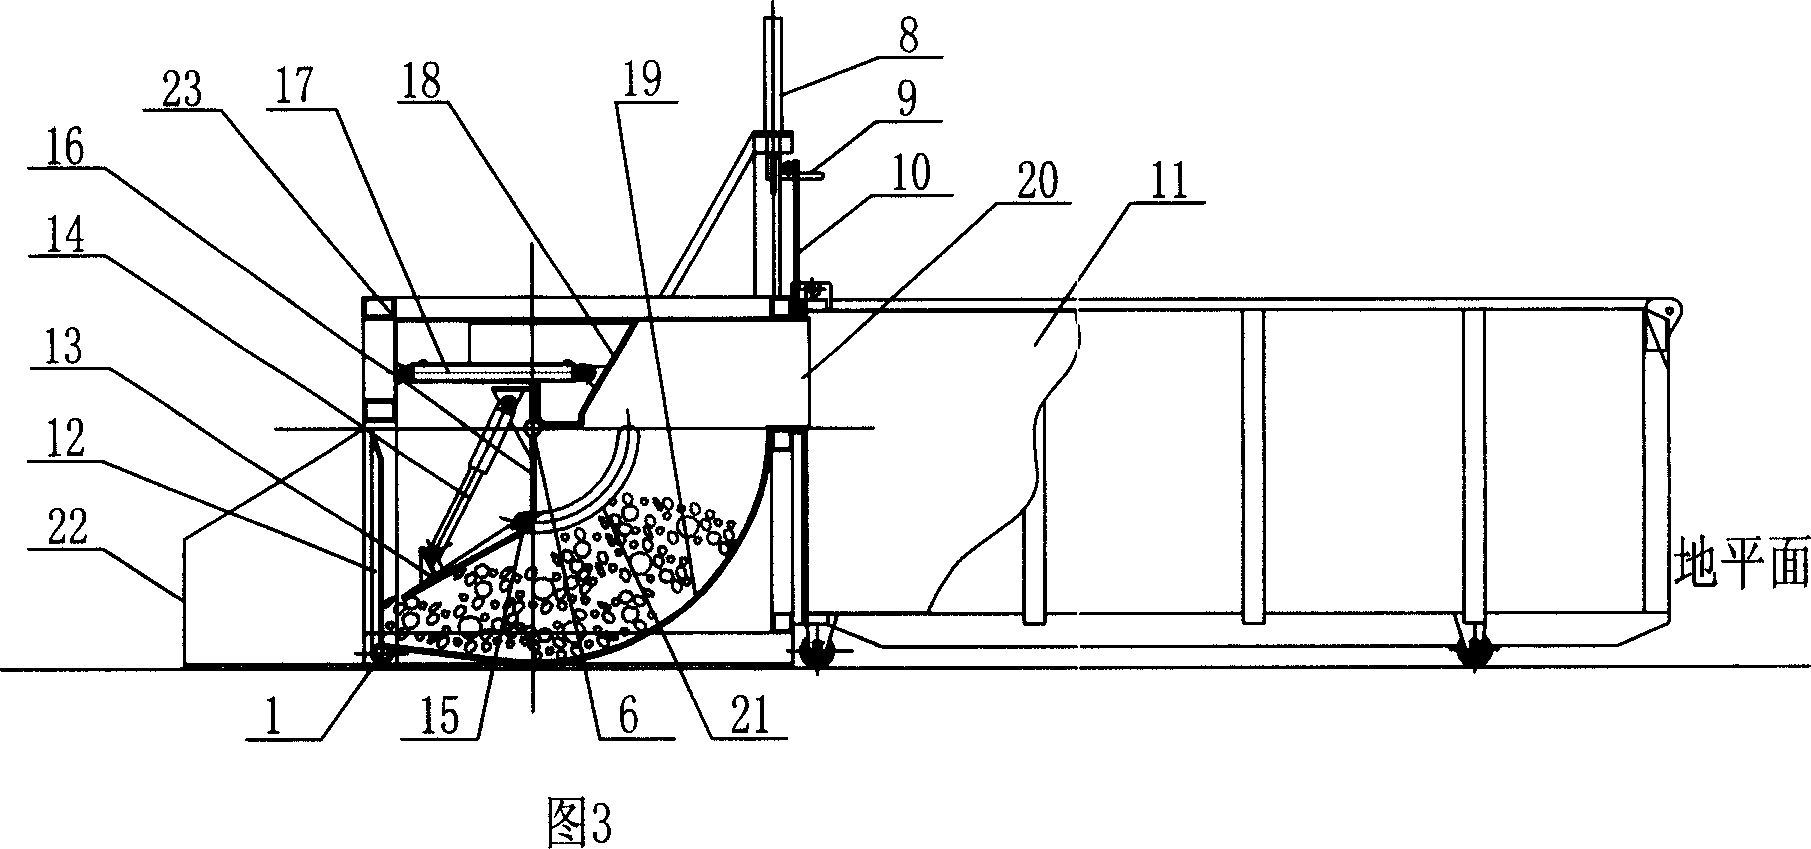 Horizontal machine for loading and compressing garbage